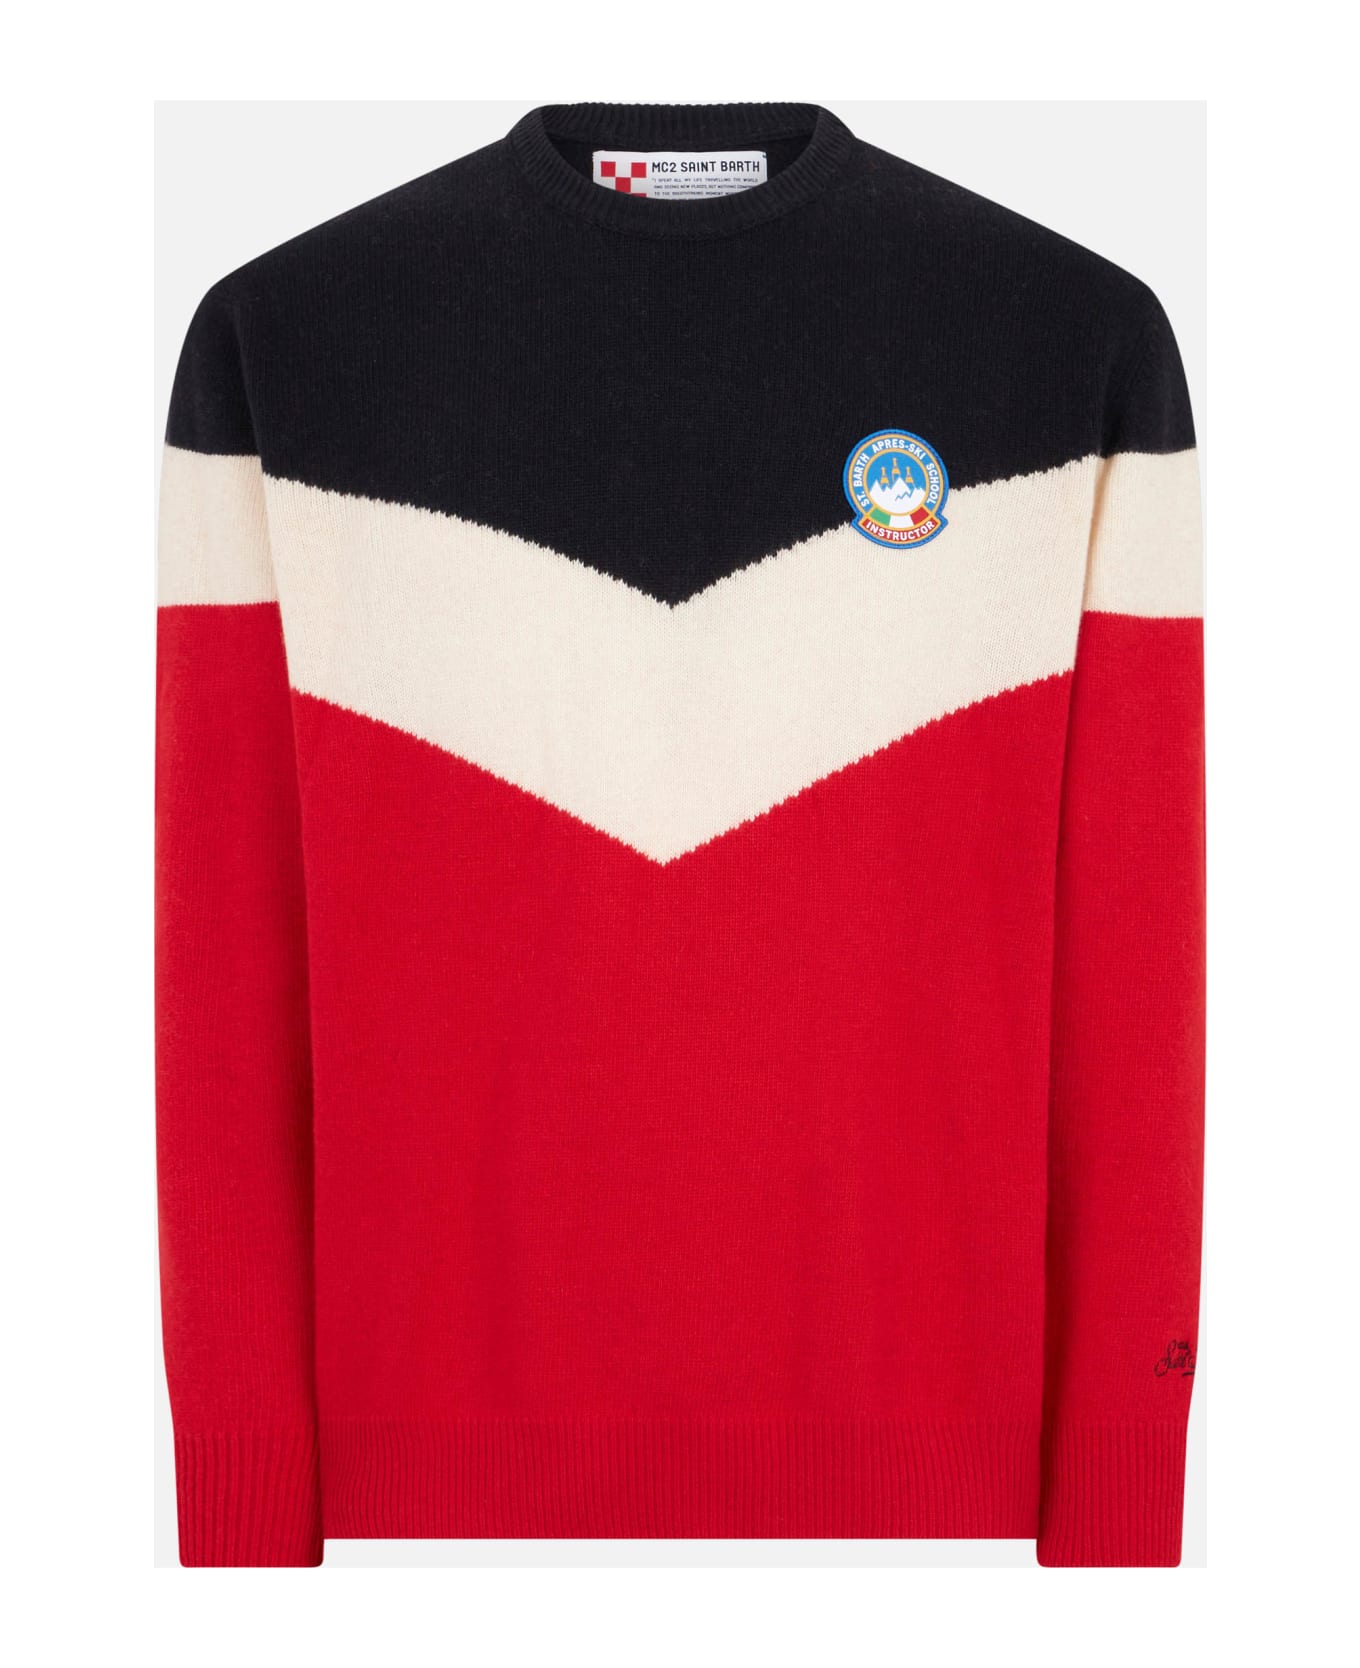 MC2 Saint Barth Blended Cashmere Man Red And Blue Sweater - BLUE